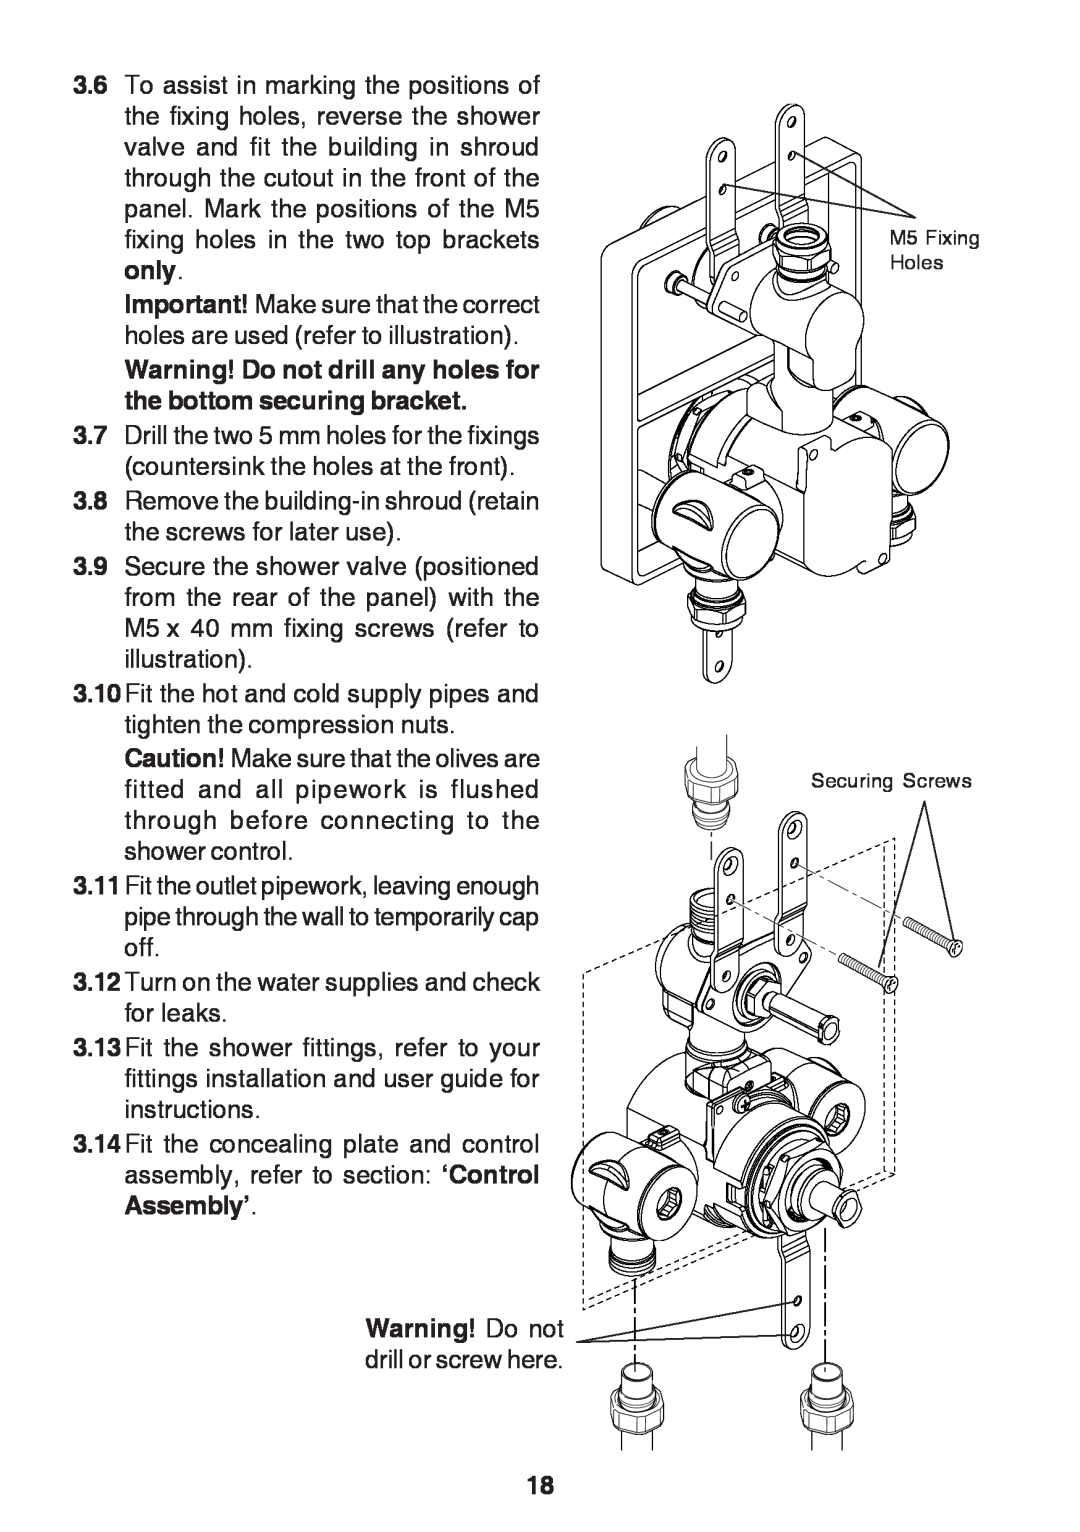 Kohler Discovery manual Warning! Do not drill or screw here, M5 Fixing Holes Securing Screws 